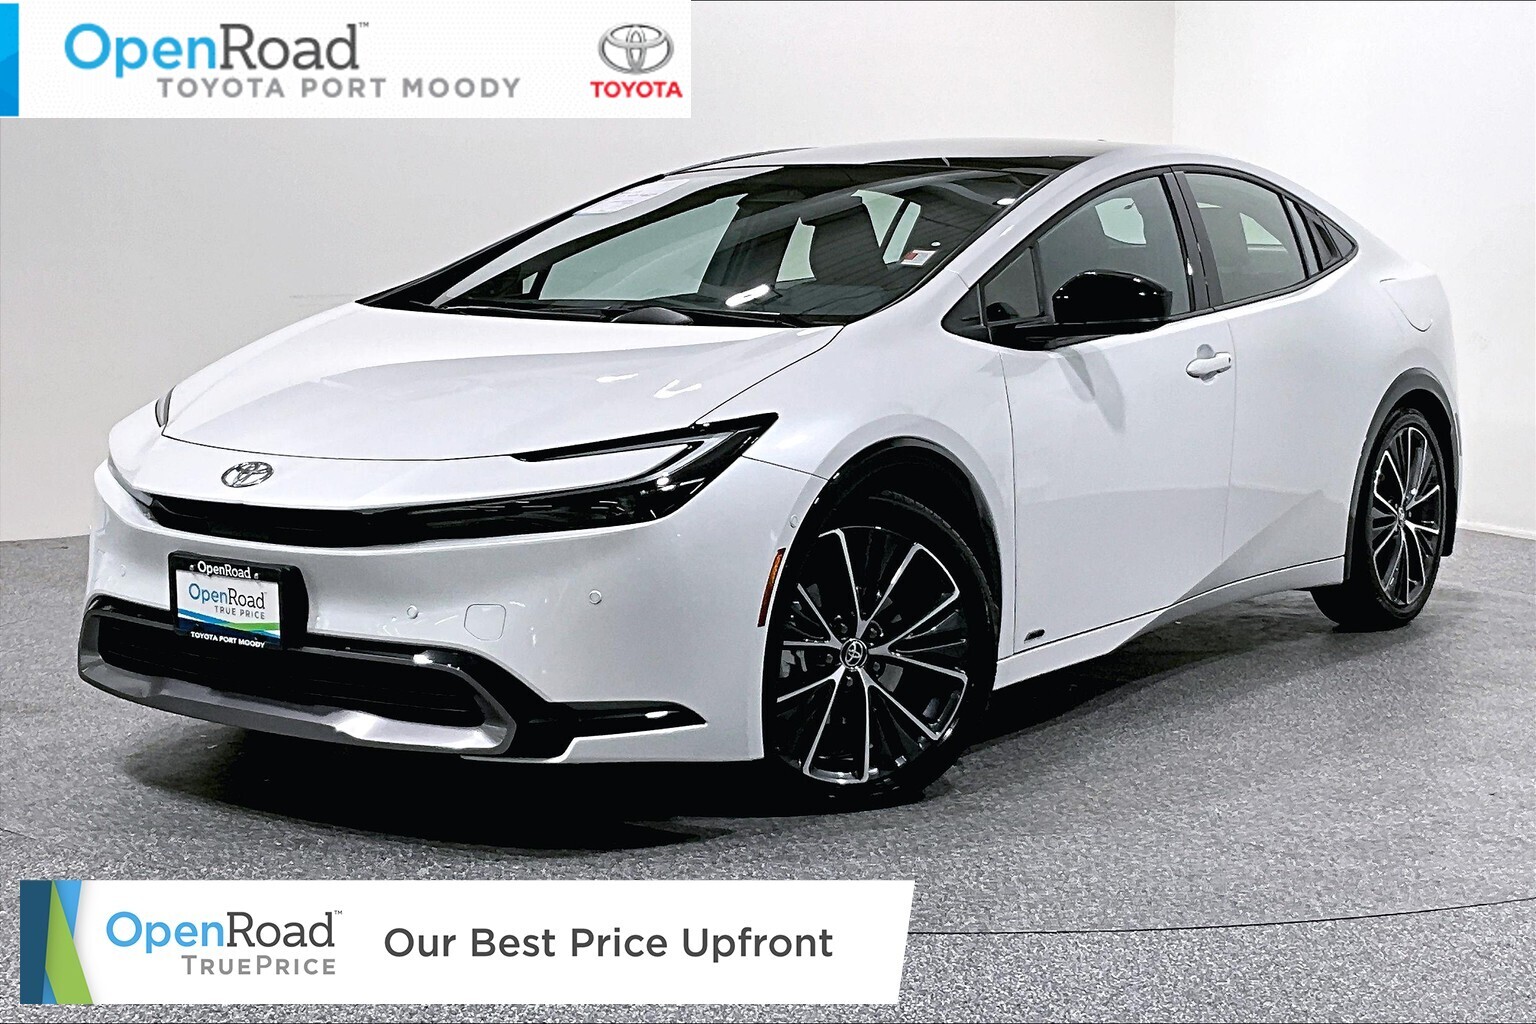 2023 Toyota Prius Limited AWD |OpenRoad True Price |Local |One Owner